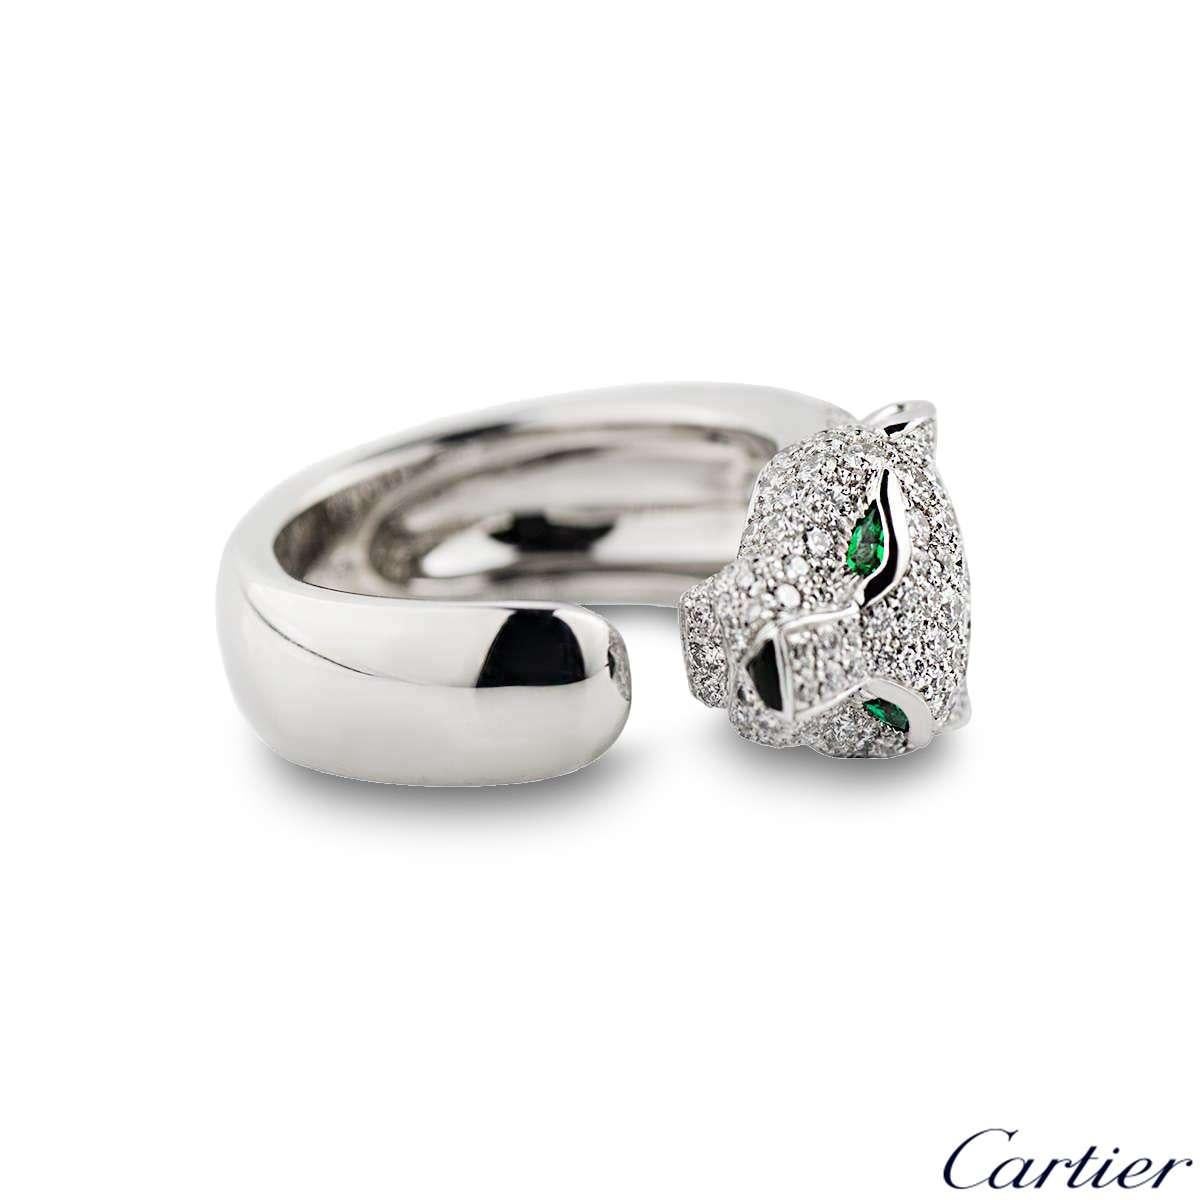 Women's Cartier Panthere Diamond Emerald and Onyx Ring N4224900